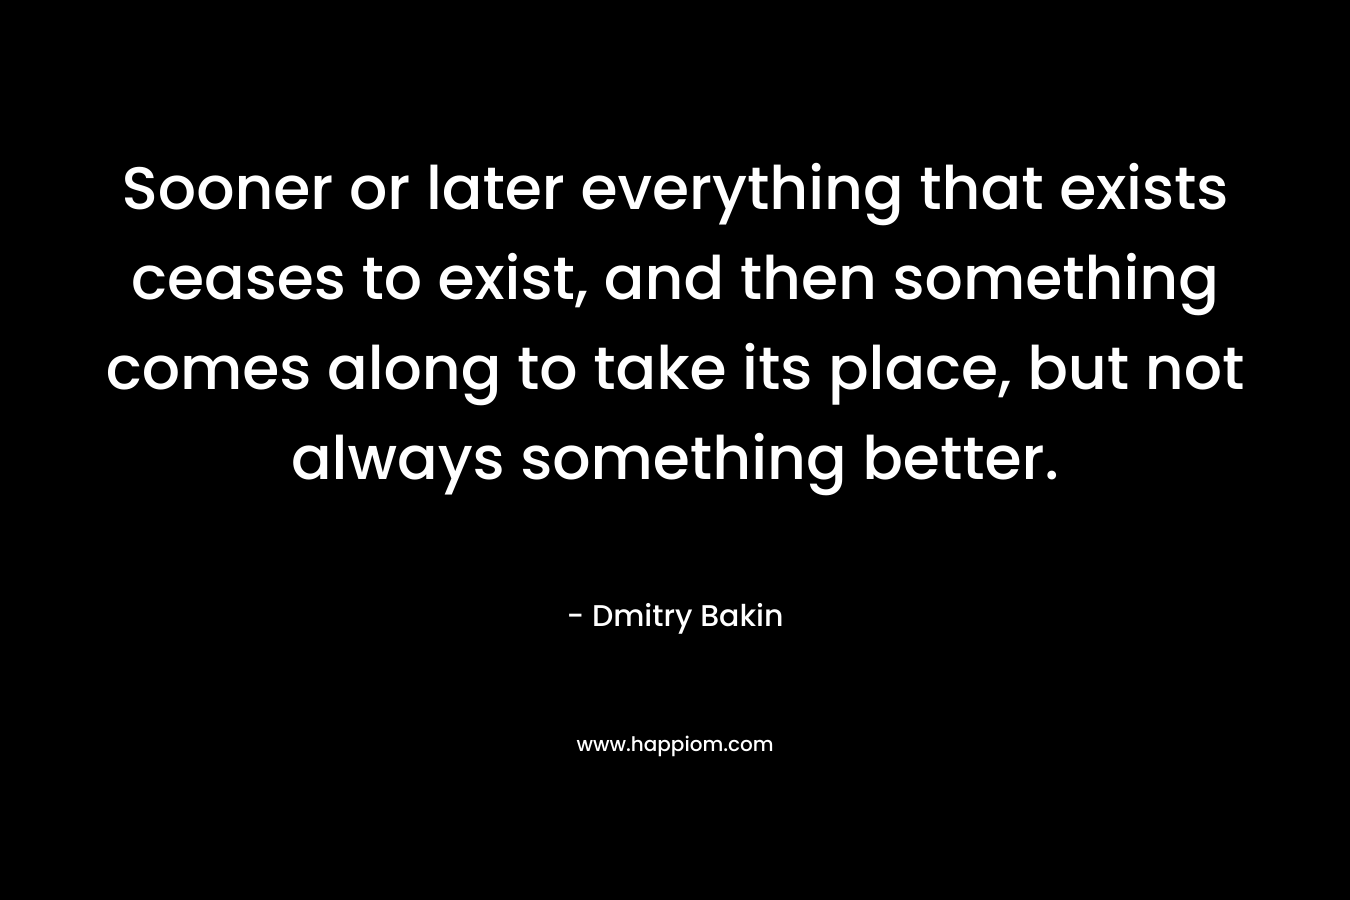 Sooner or later everything that exists ceases to exist, and then something comes along to take its place, but not always something better. – Dmitry Bakin